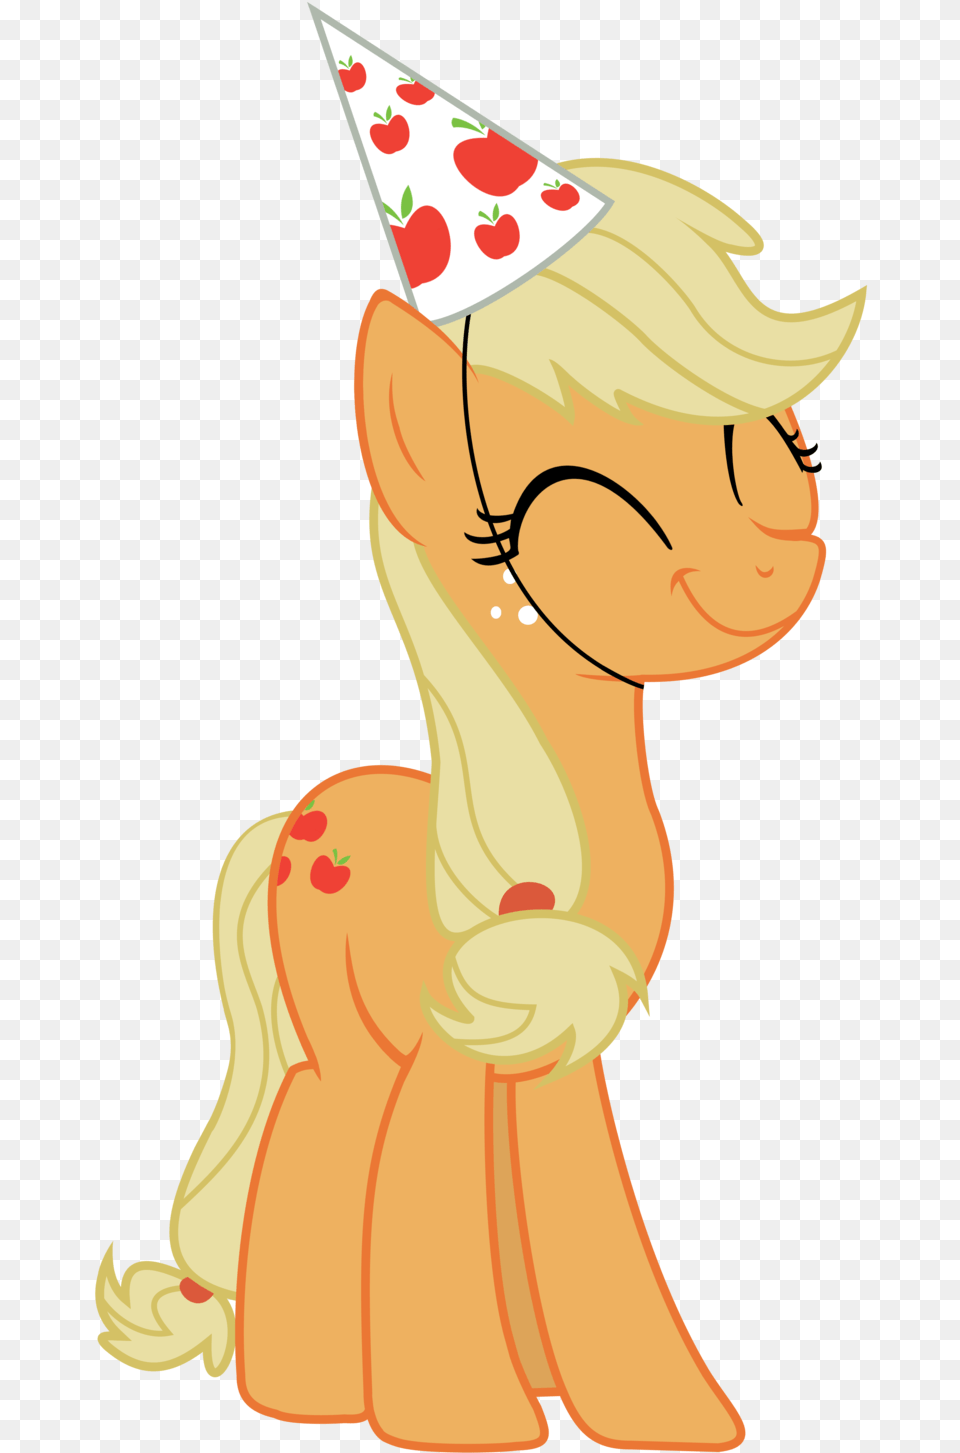 Applejack Pony From My Little My Little Pony Apple Jack Party, Clothing, Hat, Party Hat, Baby Free Png